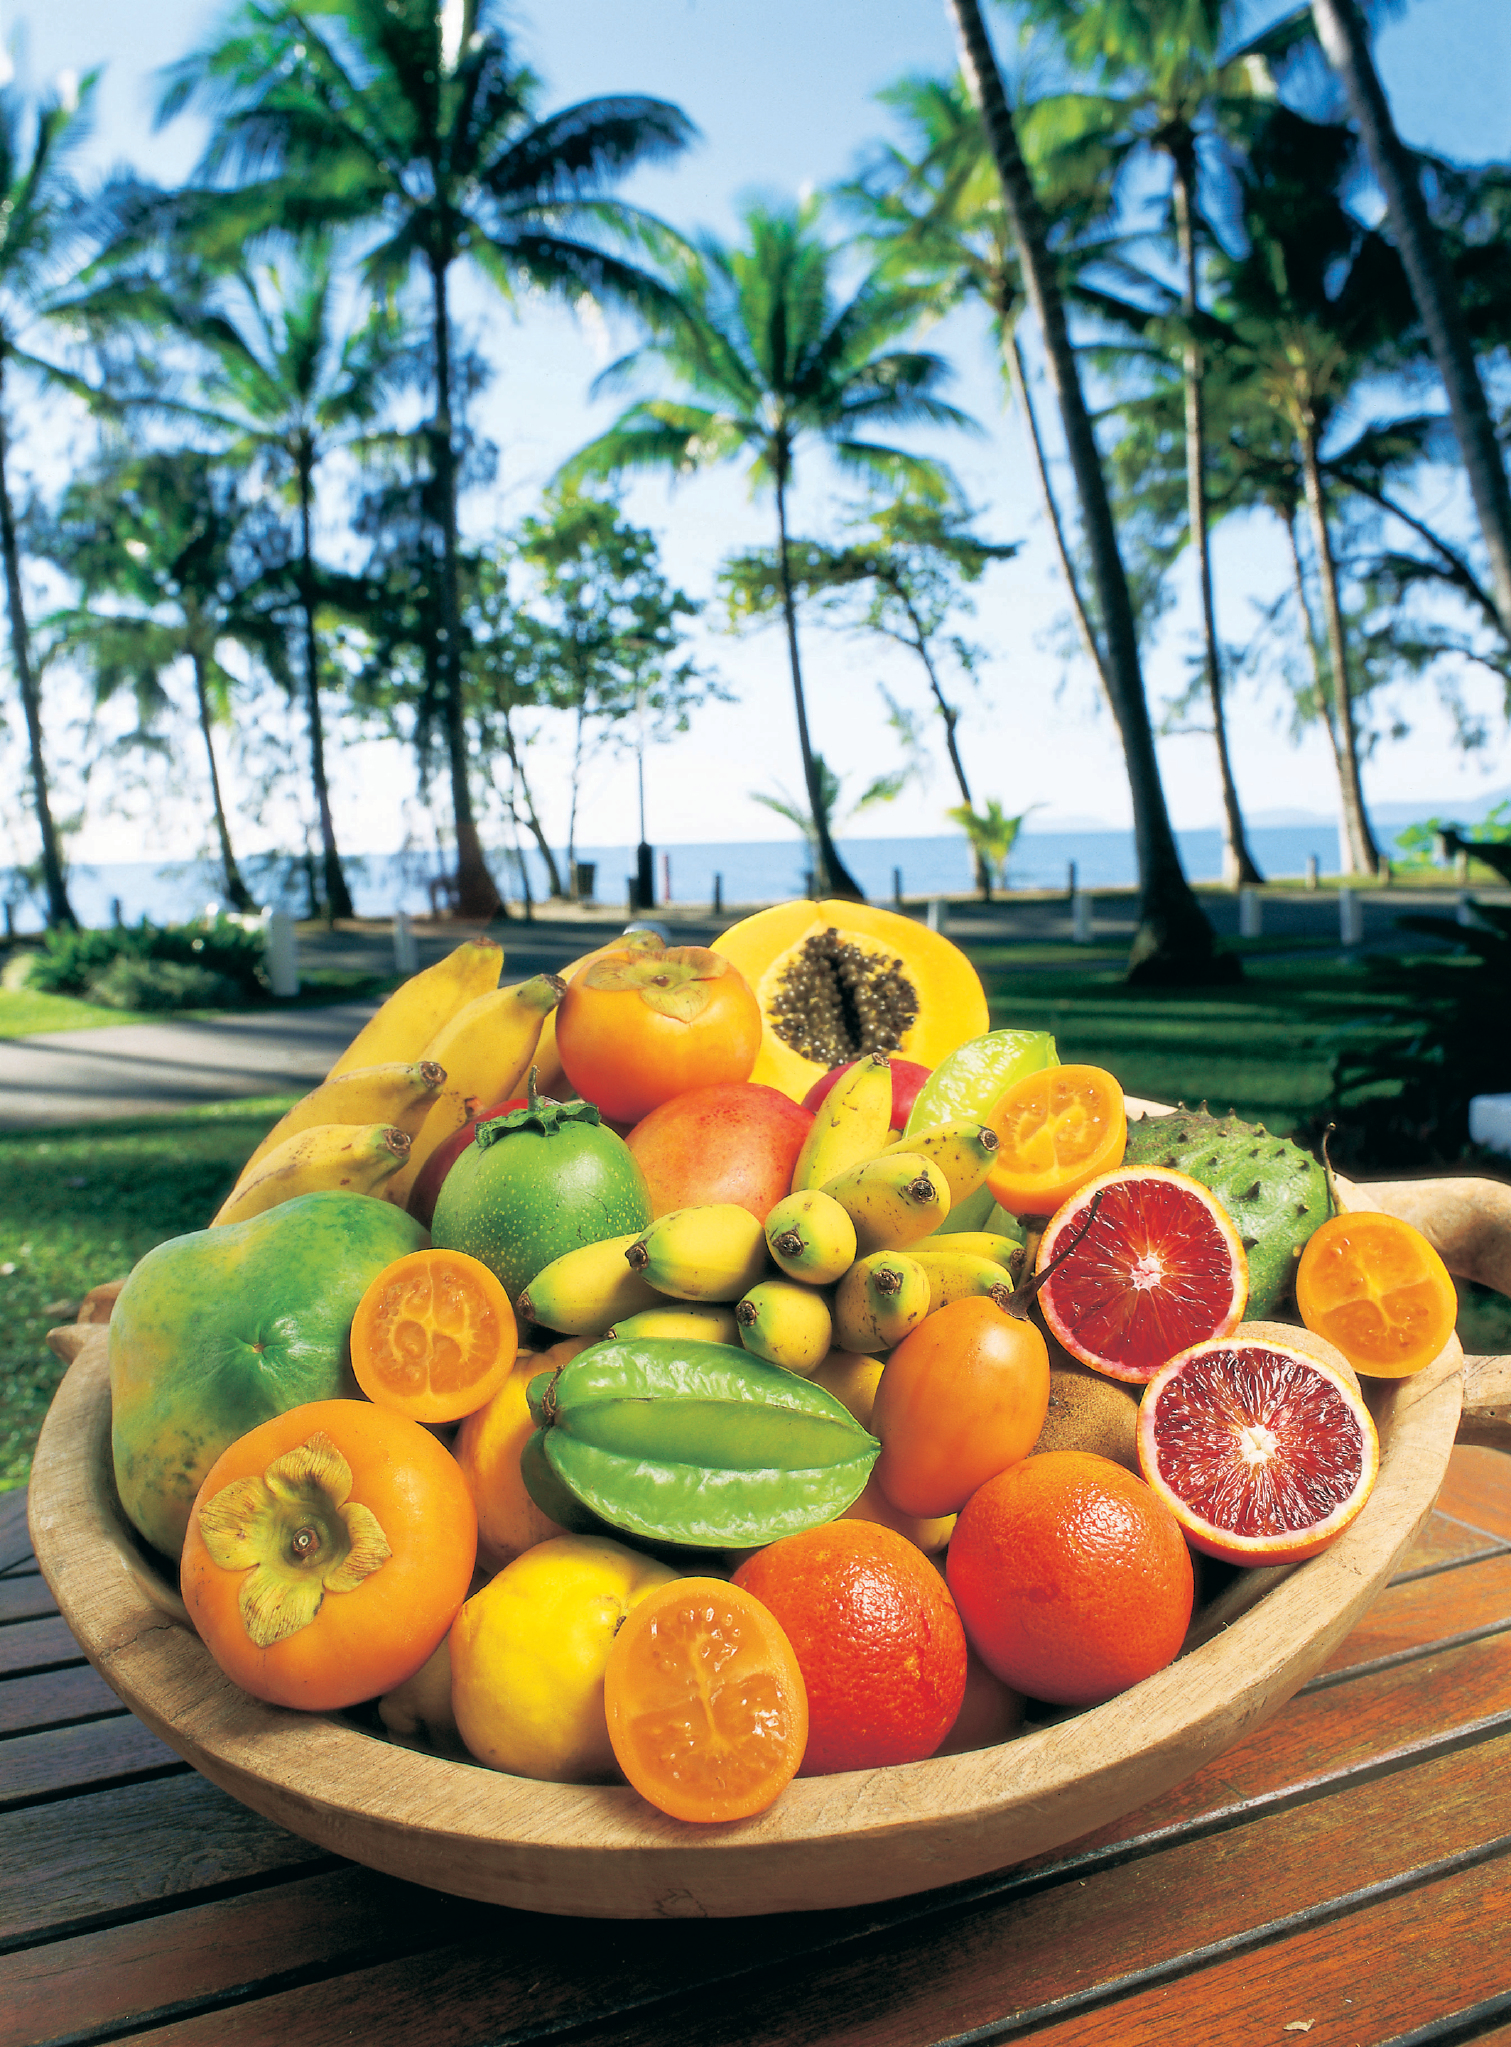 Bowl of tropical fruit on table